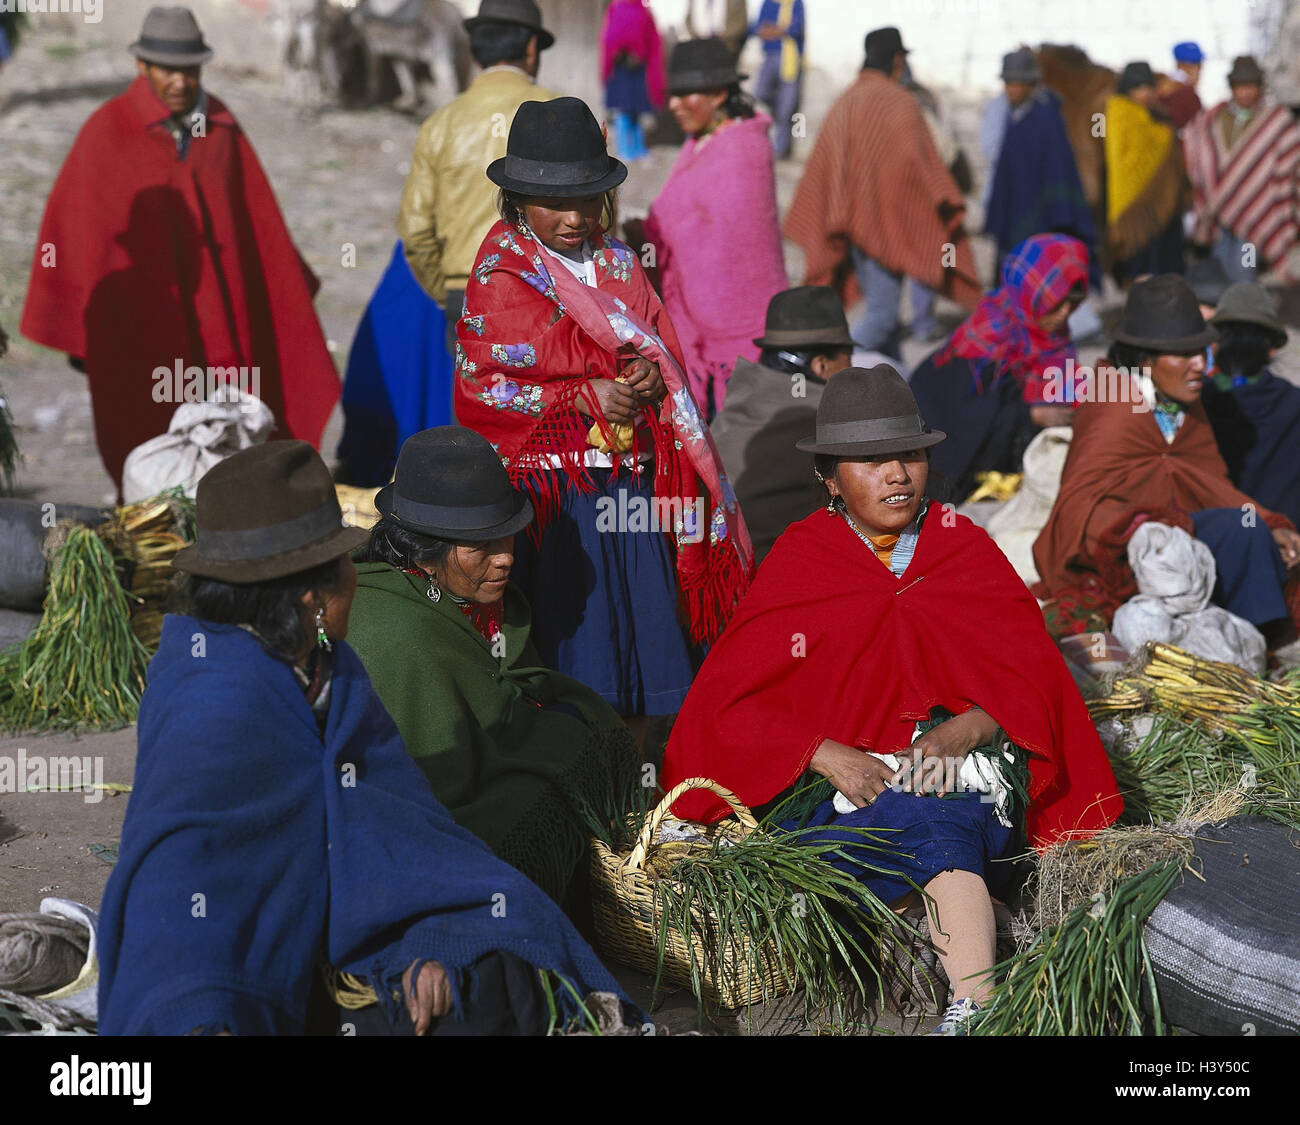 Ecuador, Zumbagua, South American Indian's market South America, Ecuador, town, market, person, locals, South American Indians, clothes, brightly, traditionally, tradition, economy, sales, product, food, vegetables, outside Stock Photo